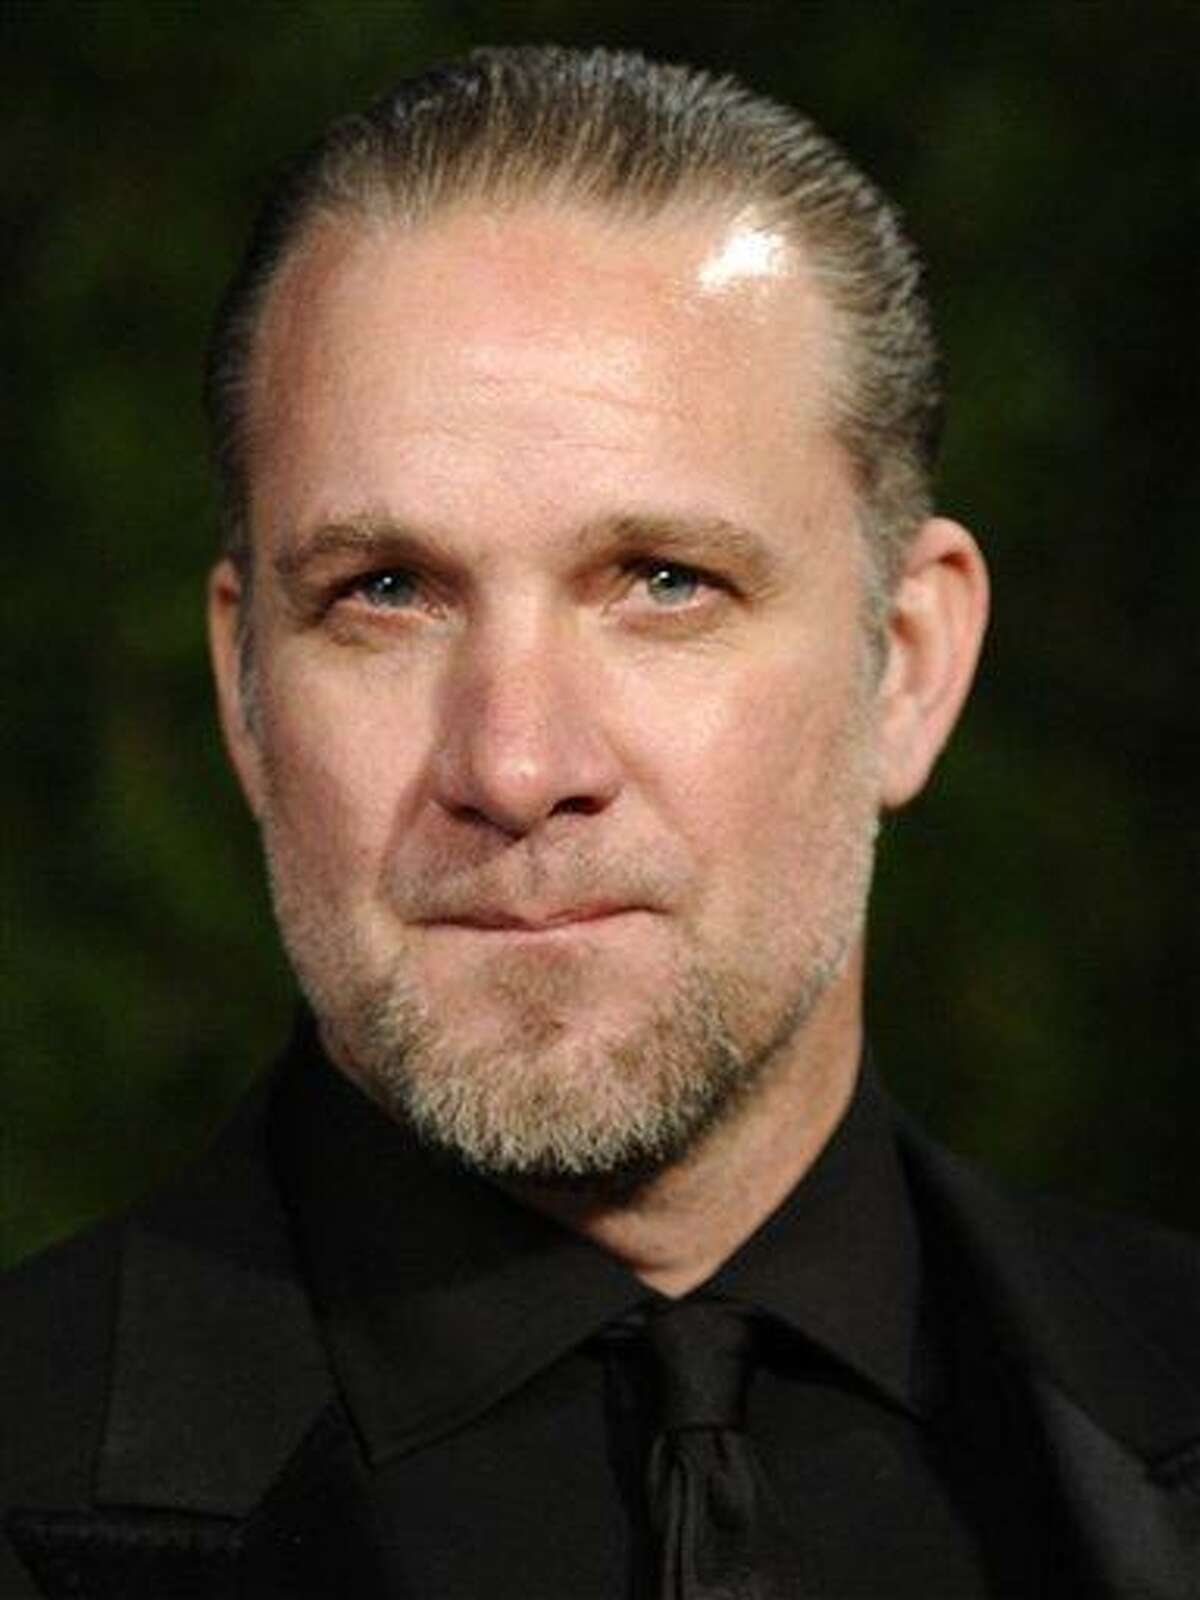 This photo taken March 7, 2010 shows Jesse James arriving for the Vanity Fair Oscar party in West Hollywood, Calif. Joe Yanny told The Associated Press that allegations of marital infidelity against James and the ensuing media "feeding frenzy" have ruined the biker businessman's life. James is married to actress Sandra Bullock. (AP Photo/Peter Kramer)